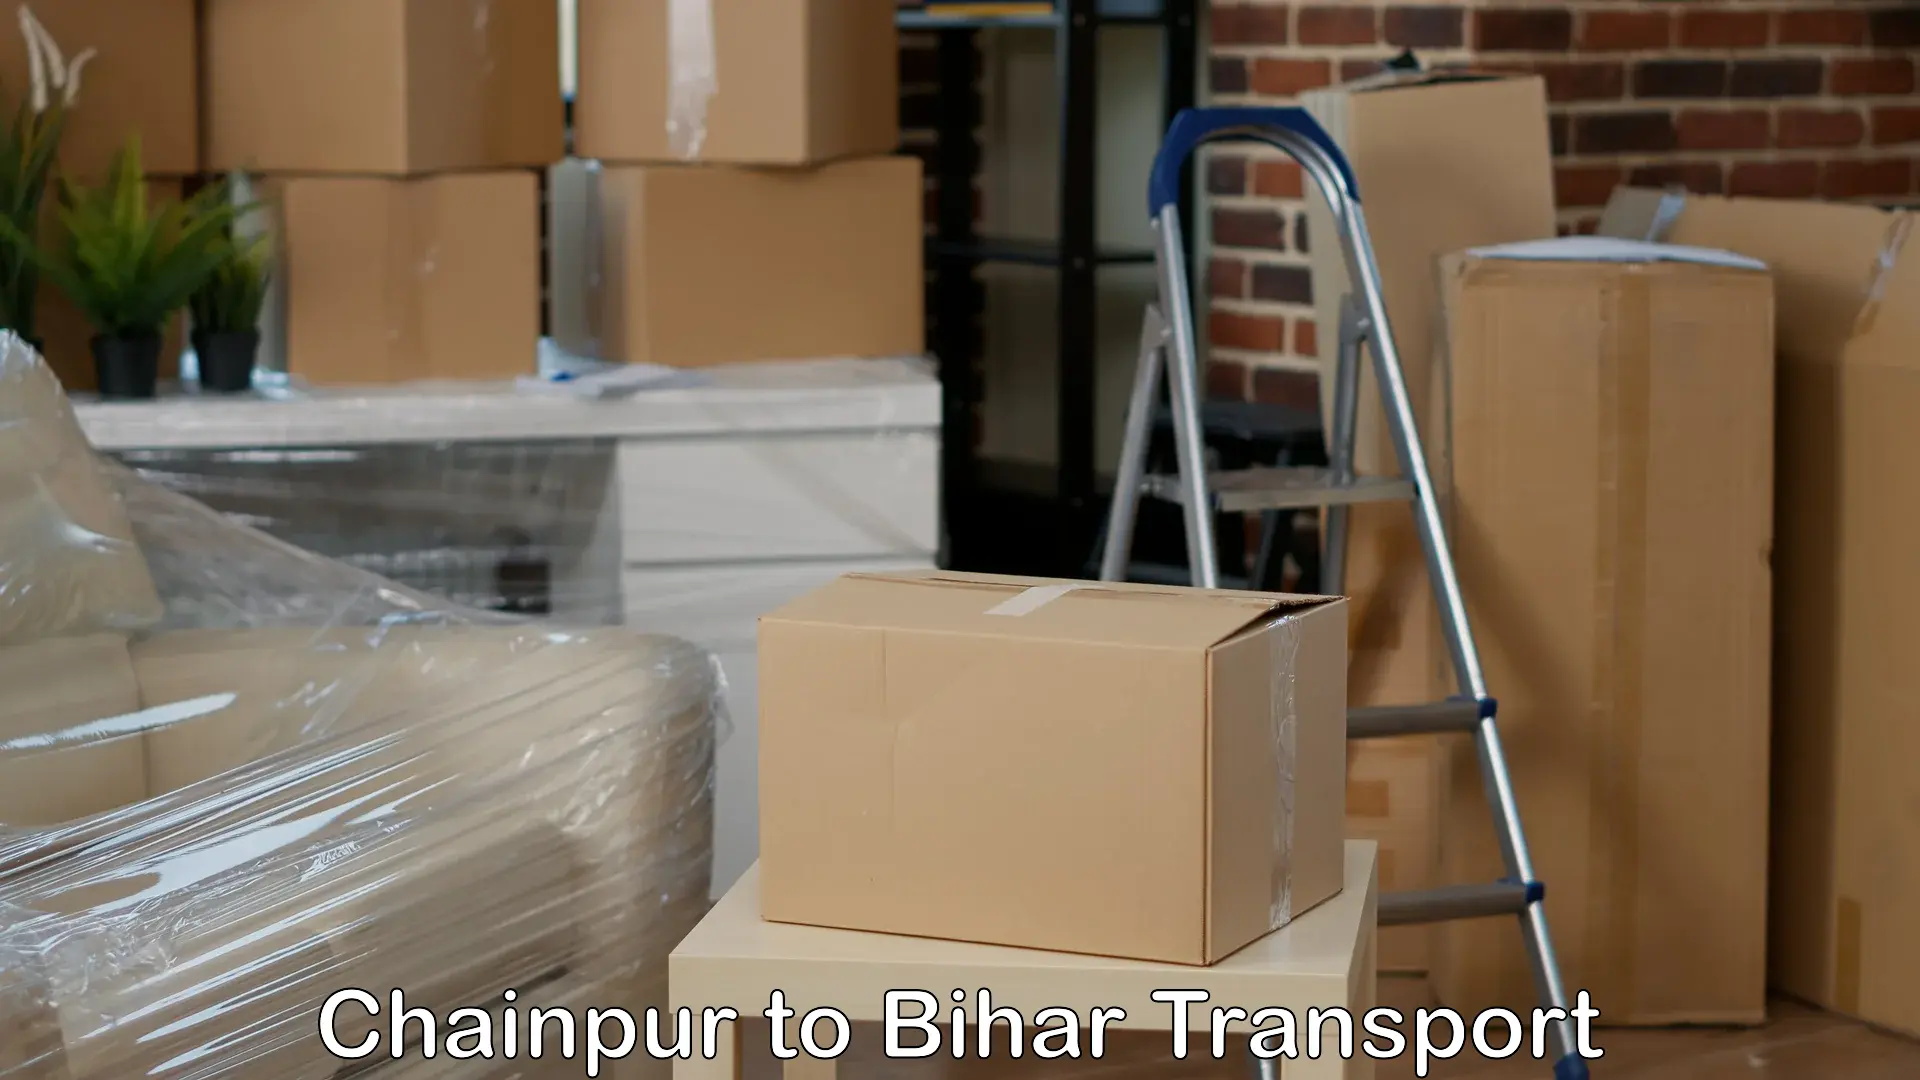 Goods delivery service Chainpur to Dumraon